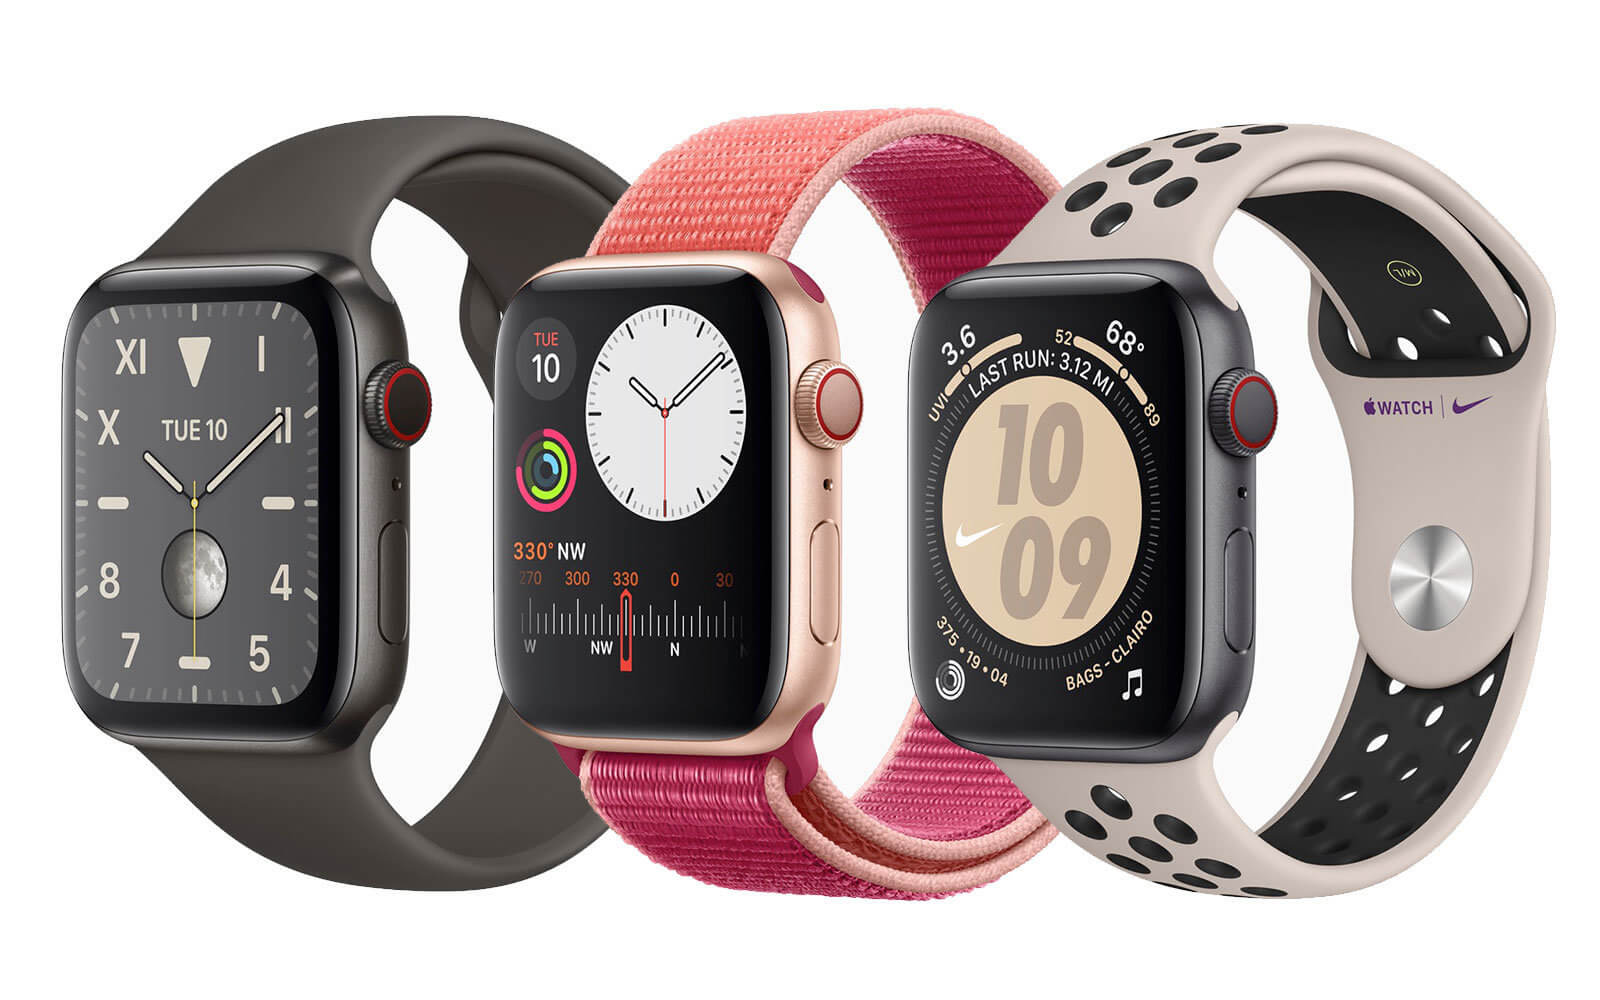 Government warns Apple Watch users of security flow: Here’s what to do